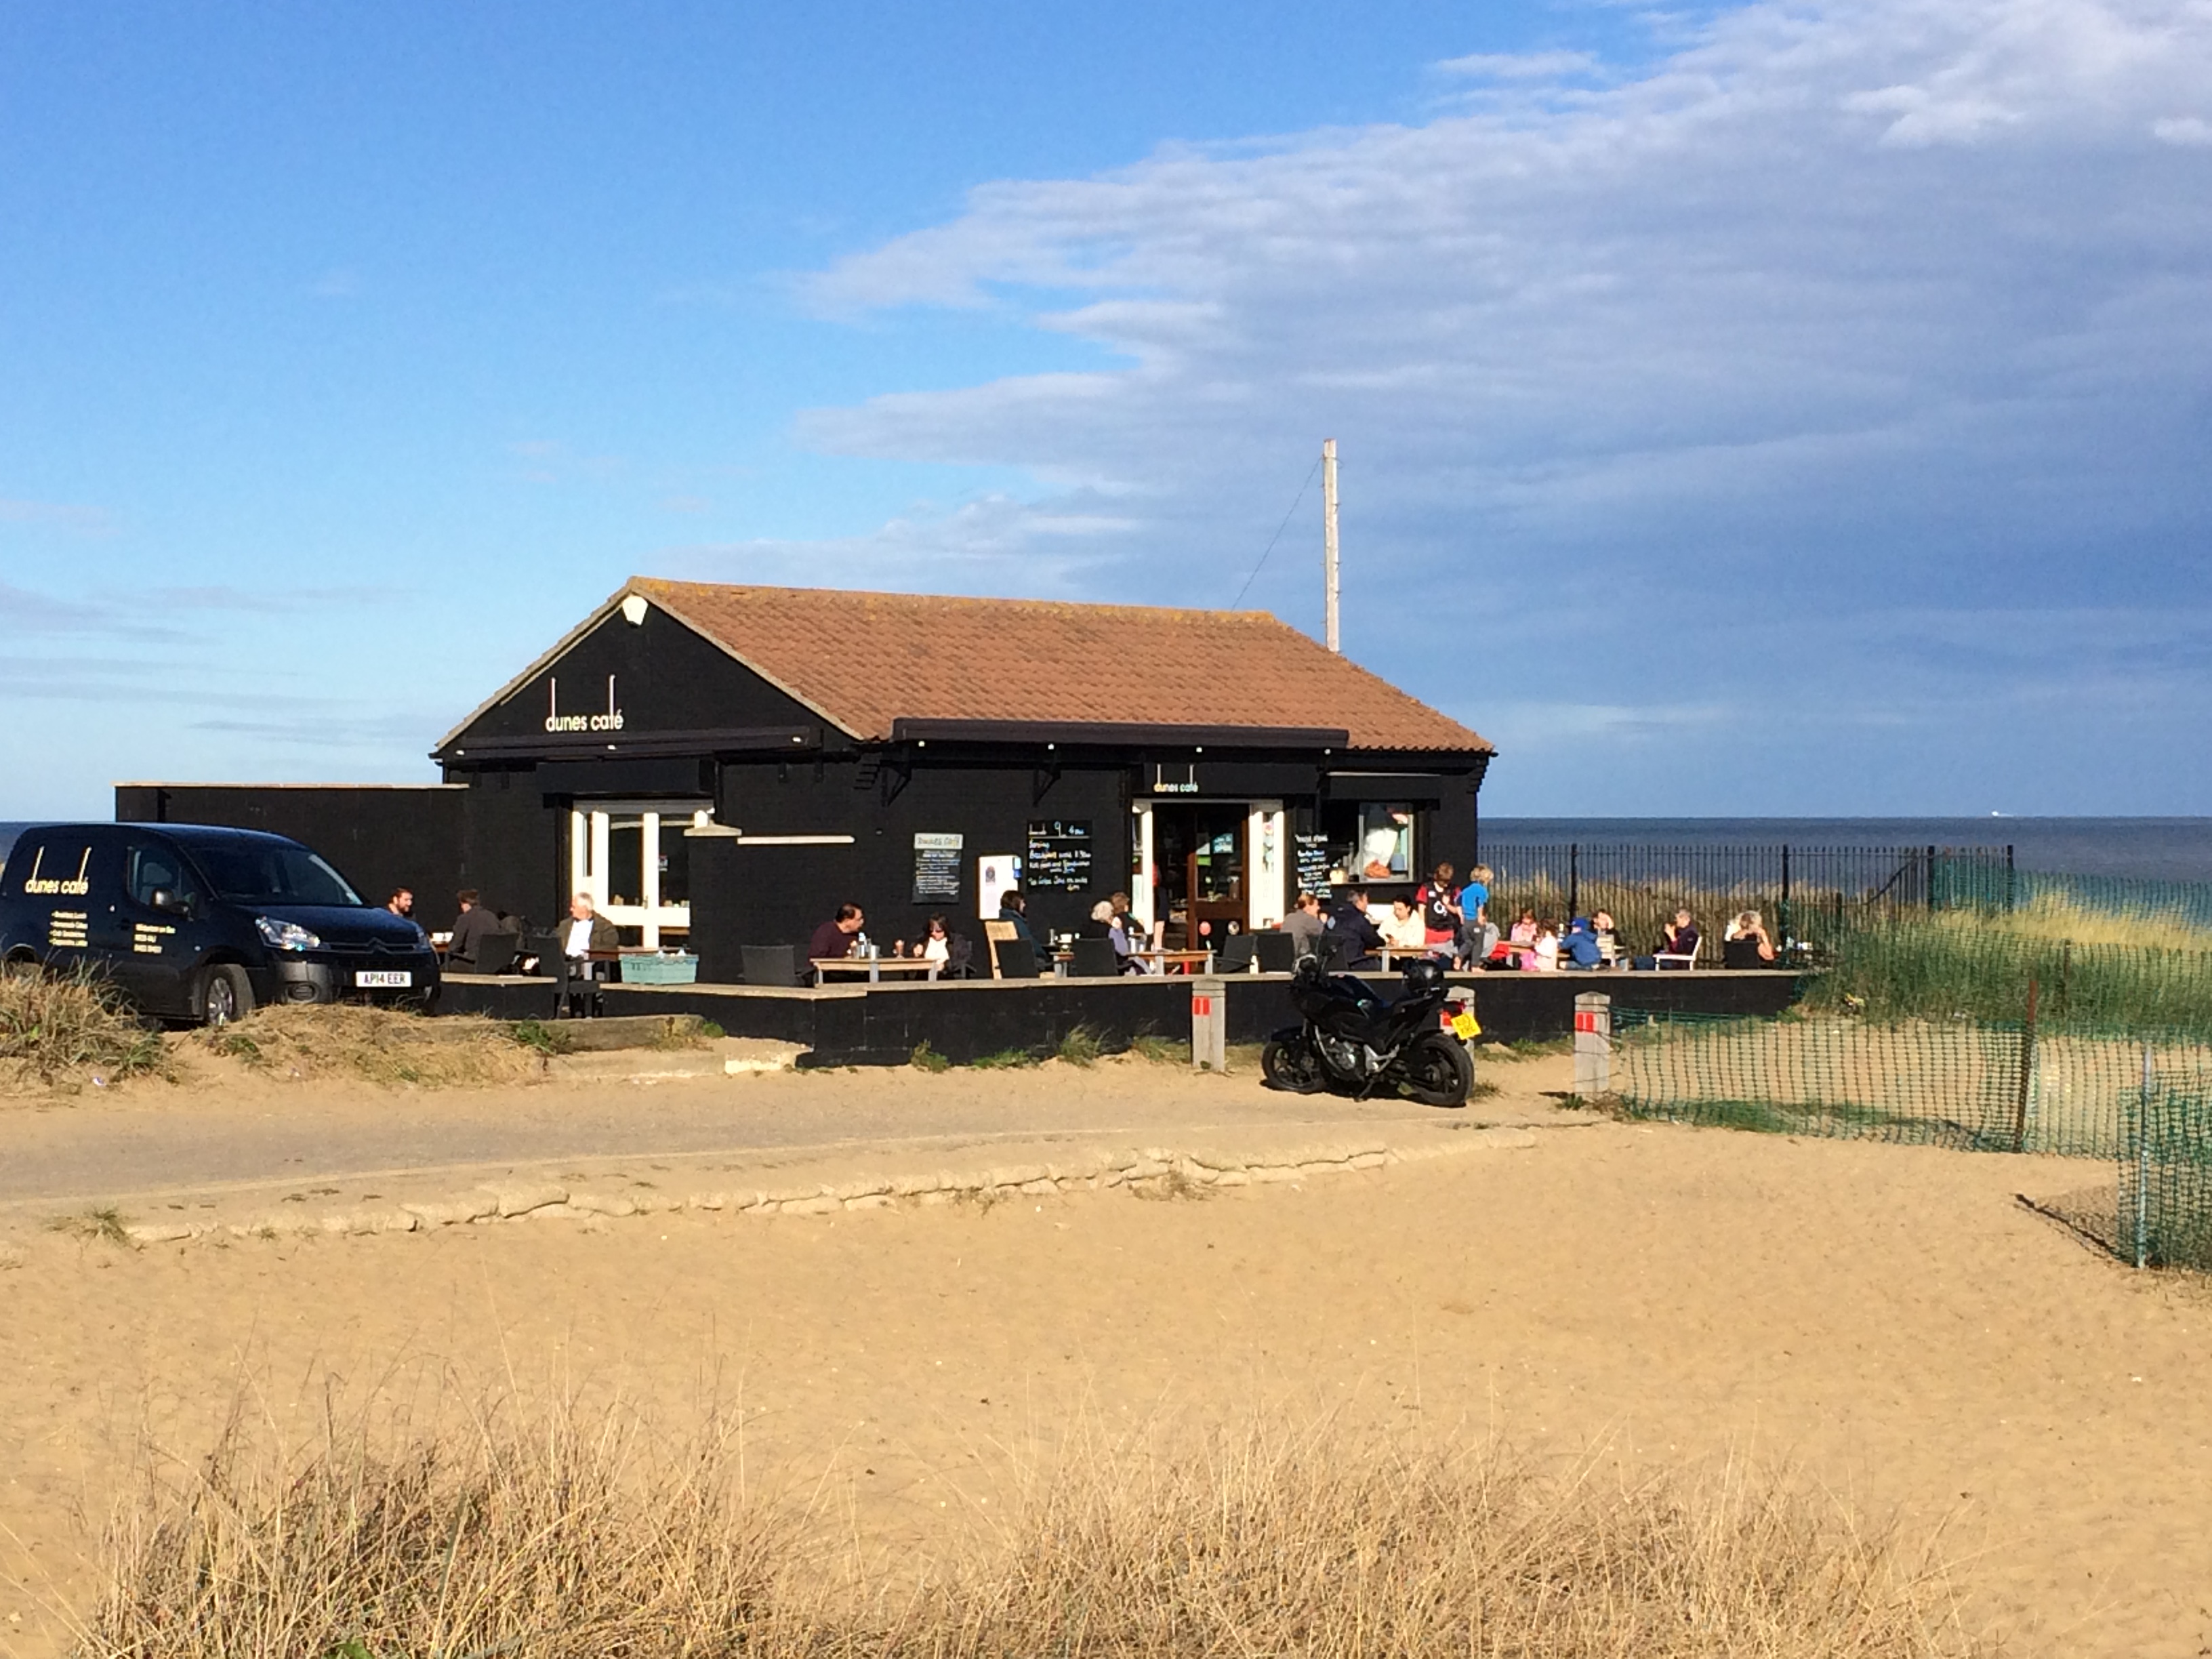 Dunes cafe on the beach at Winterton